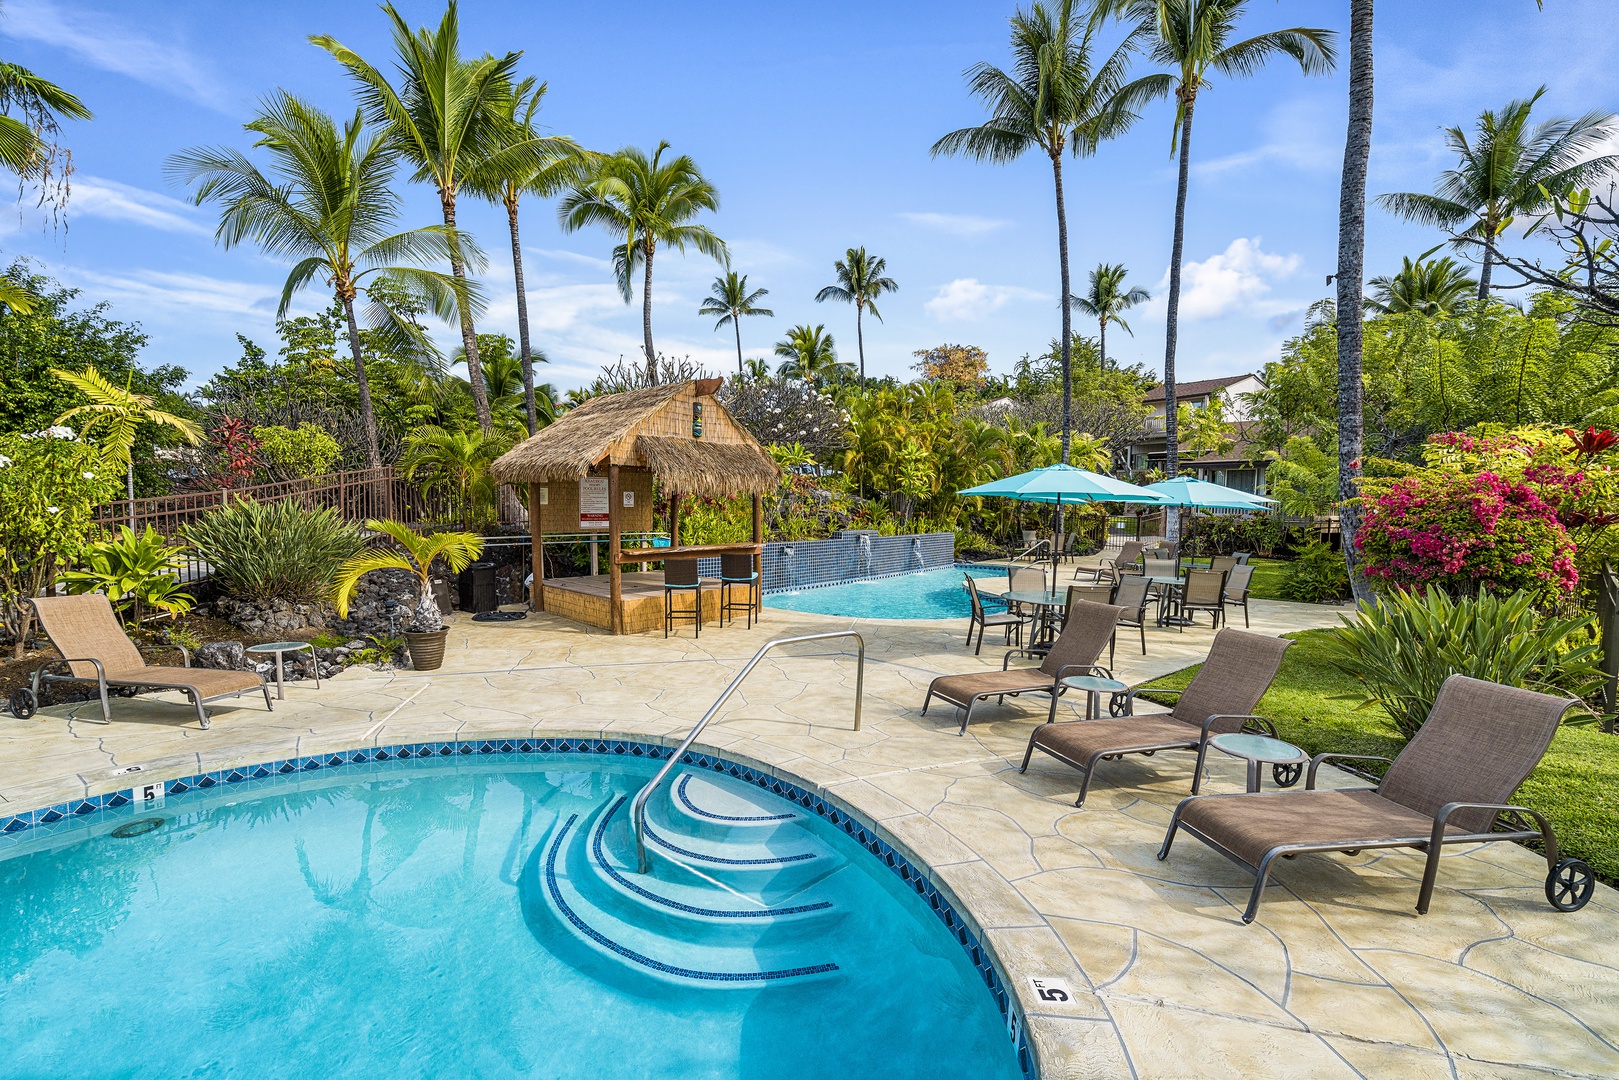 Kailua Kona Vacation Rentals, Keauhou Resort 113 - There are two pools one shallow for the kids and an adult pool!